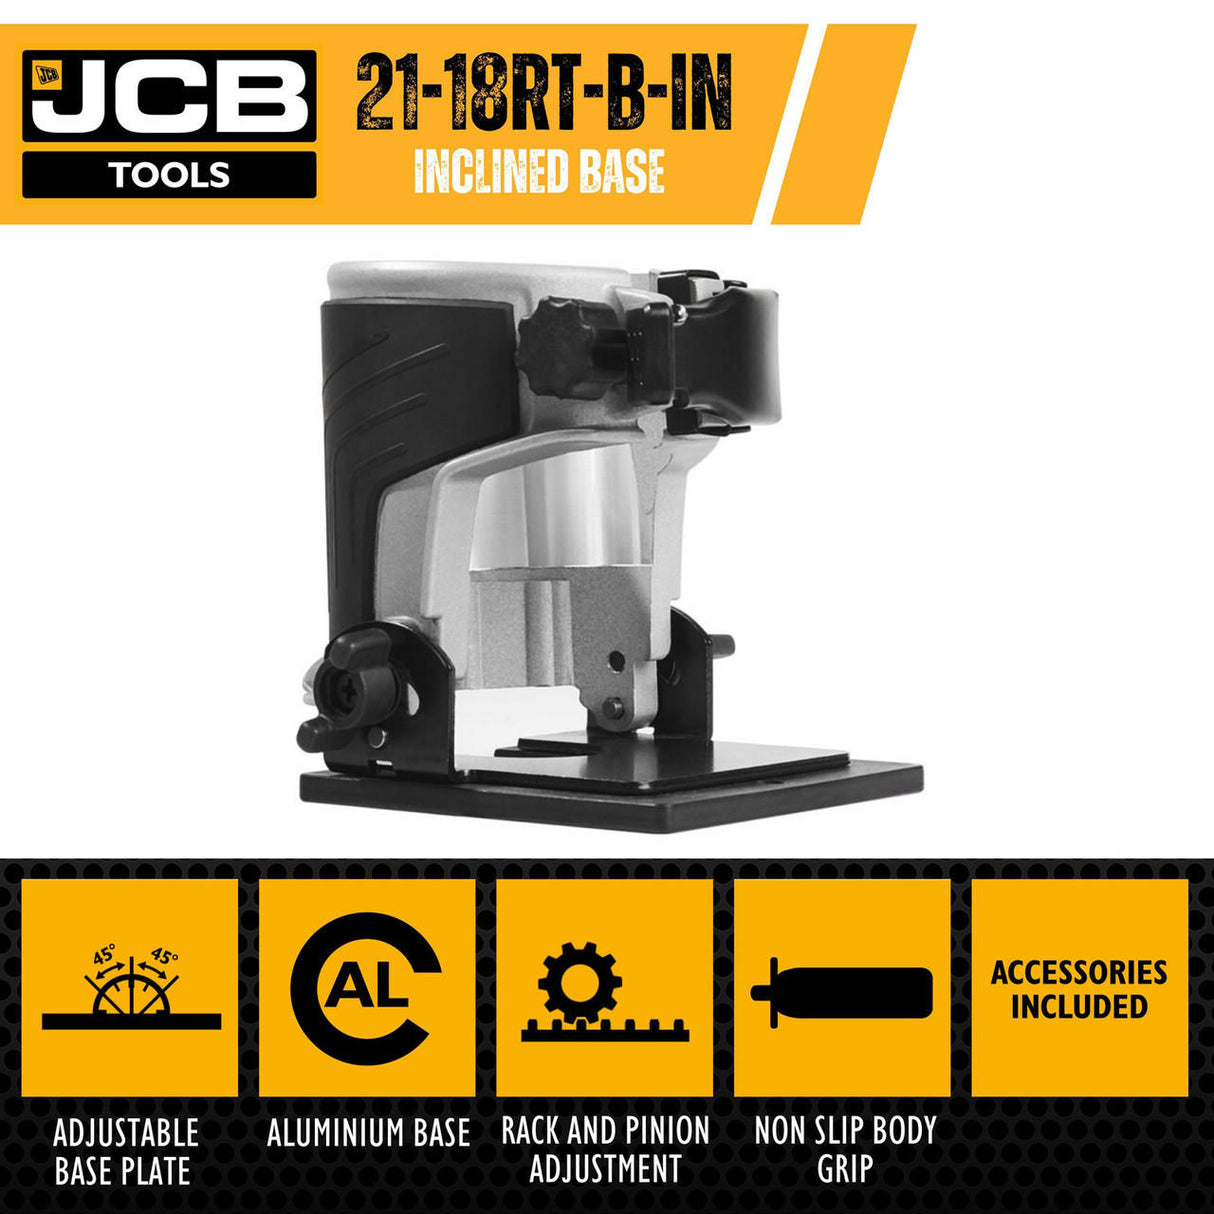 jcb tools JCB Inclined Router Base | 21-18RT-B-IN 